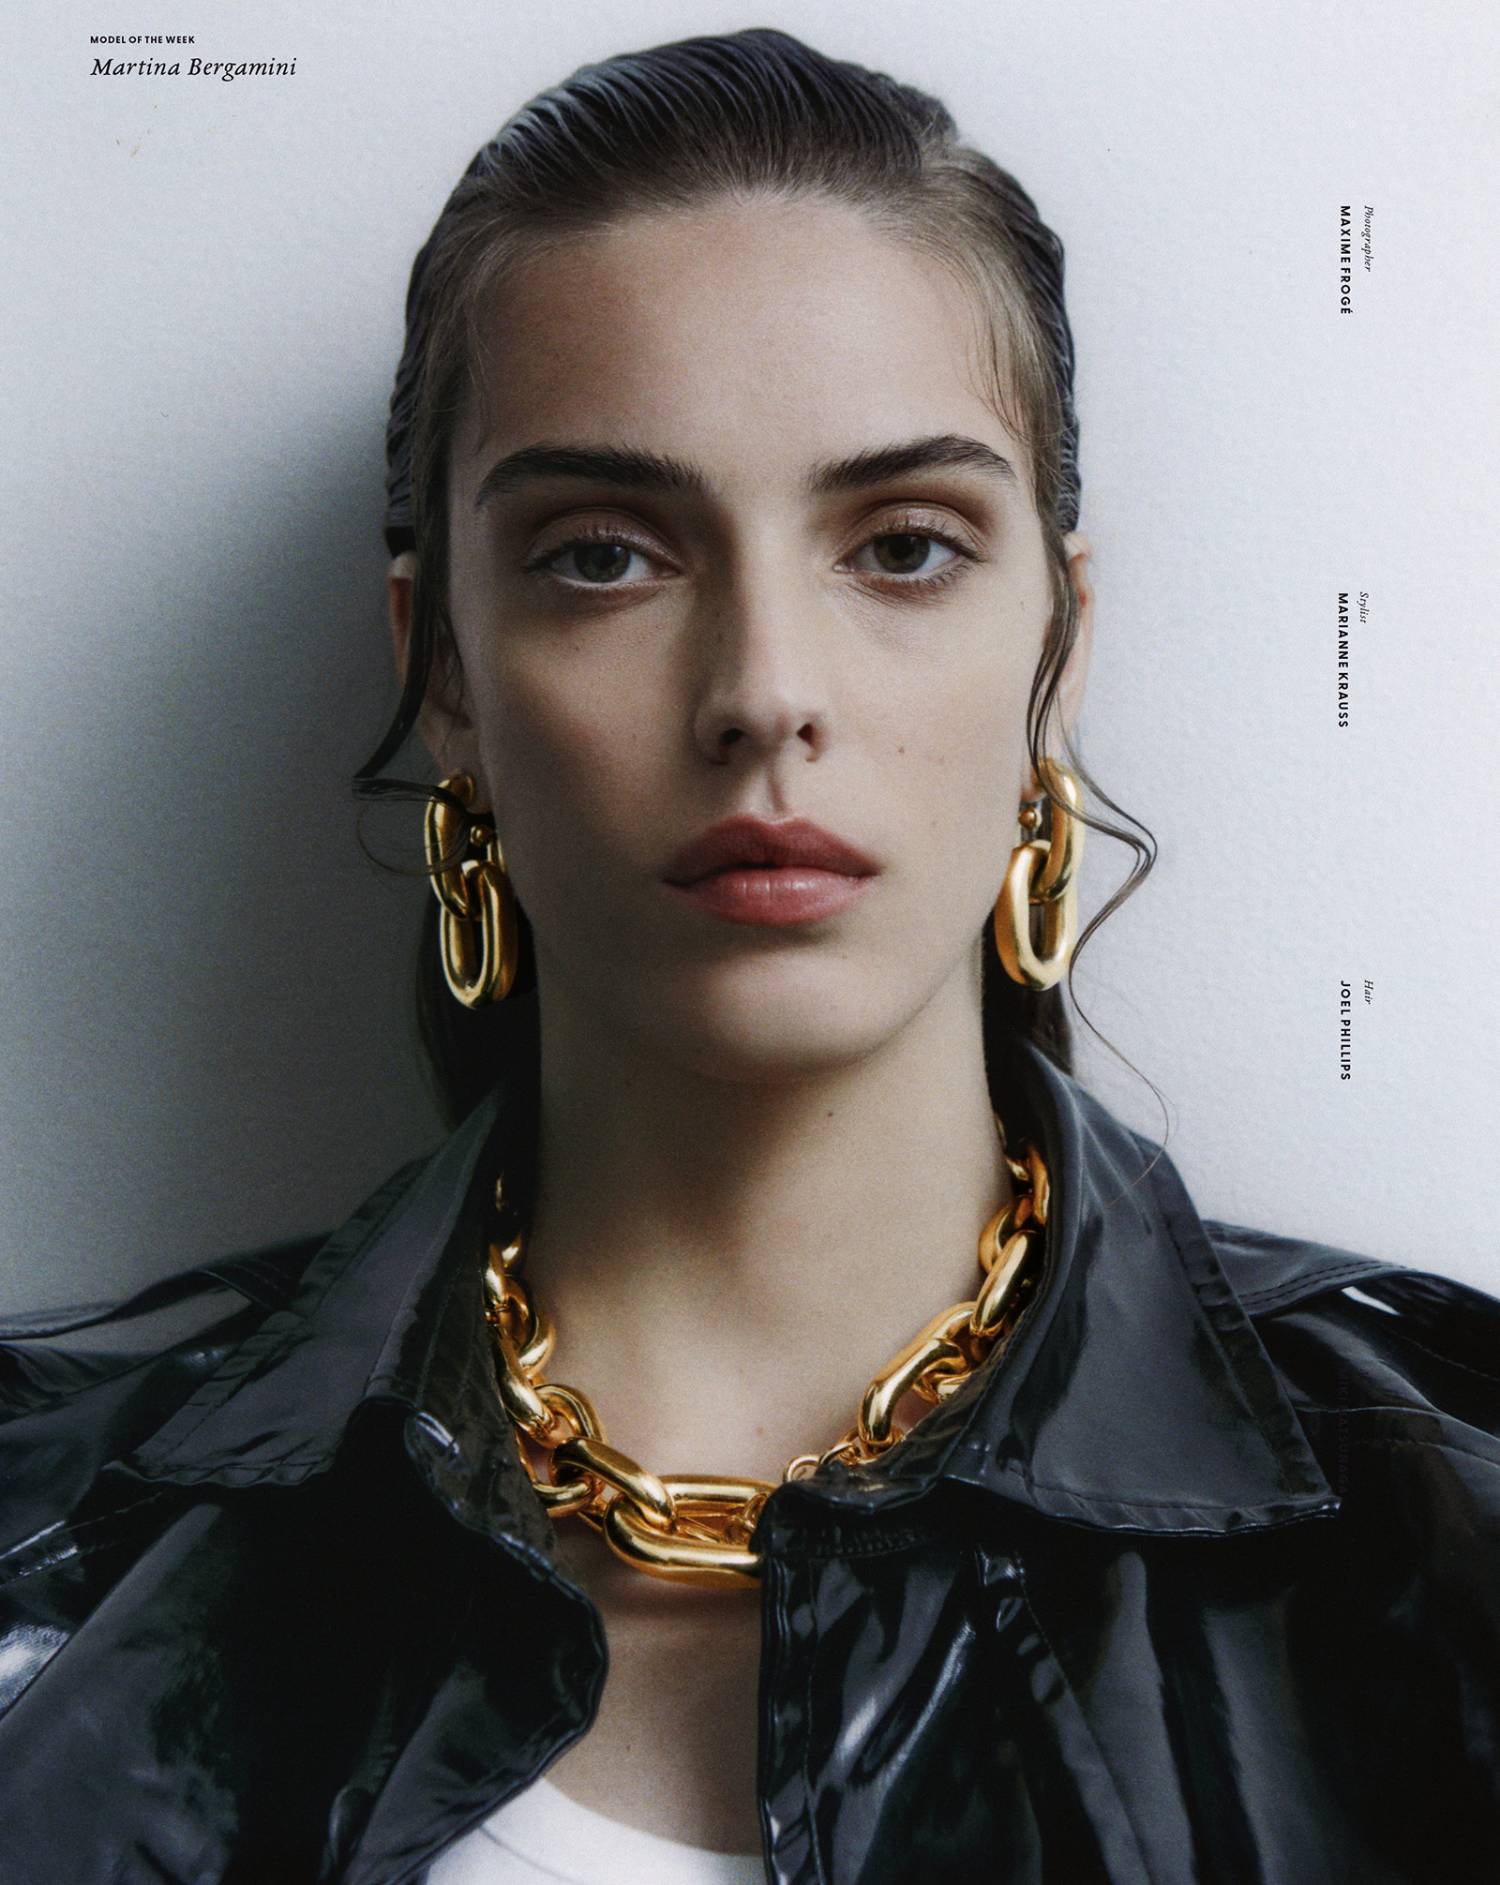 Martina Bergamini by Maxime Froge for Models com, wearing Saint Laurent Black Patent Leather Coat and Rabanne Gold-Plated Chain Necklace and Earrings